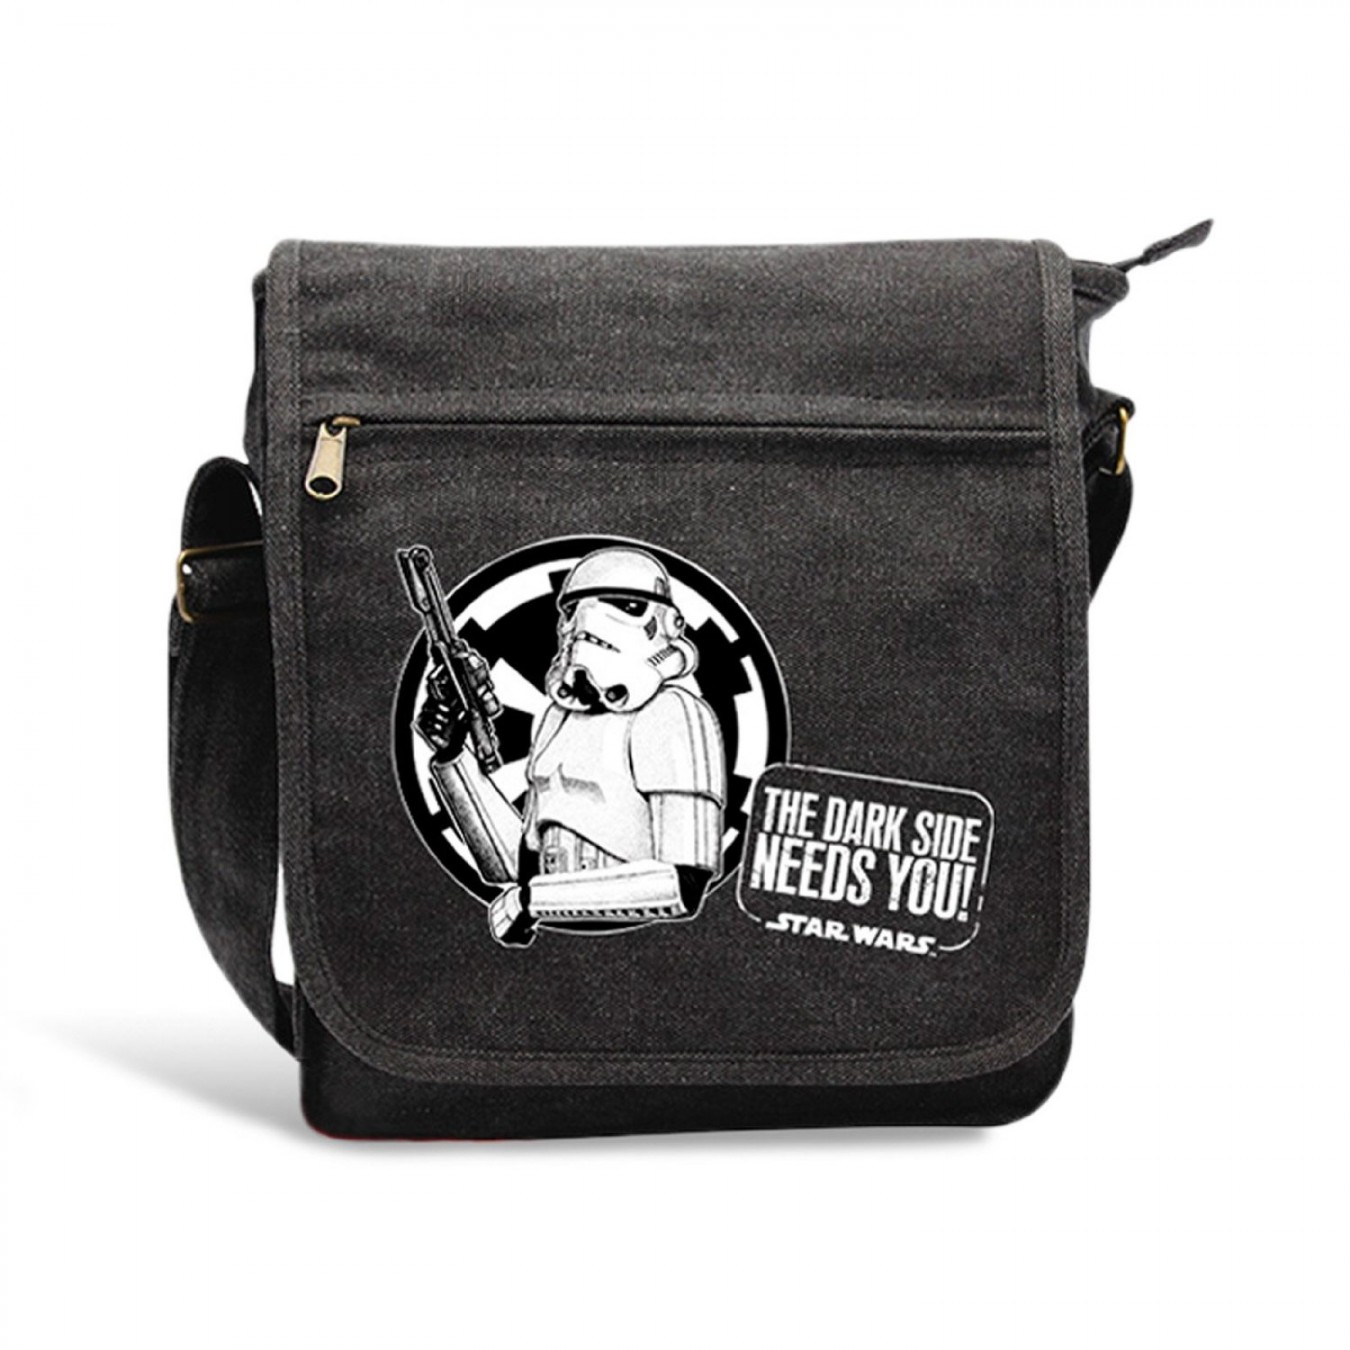 STAR WARS - Messenger bag small Troopers